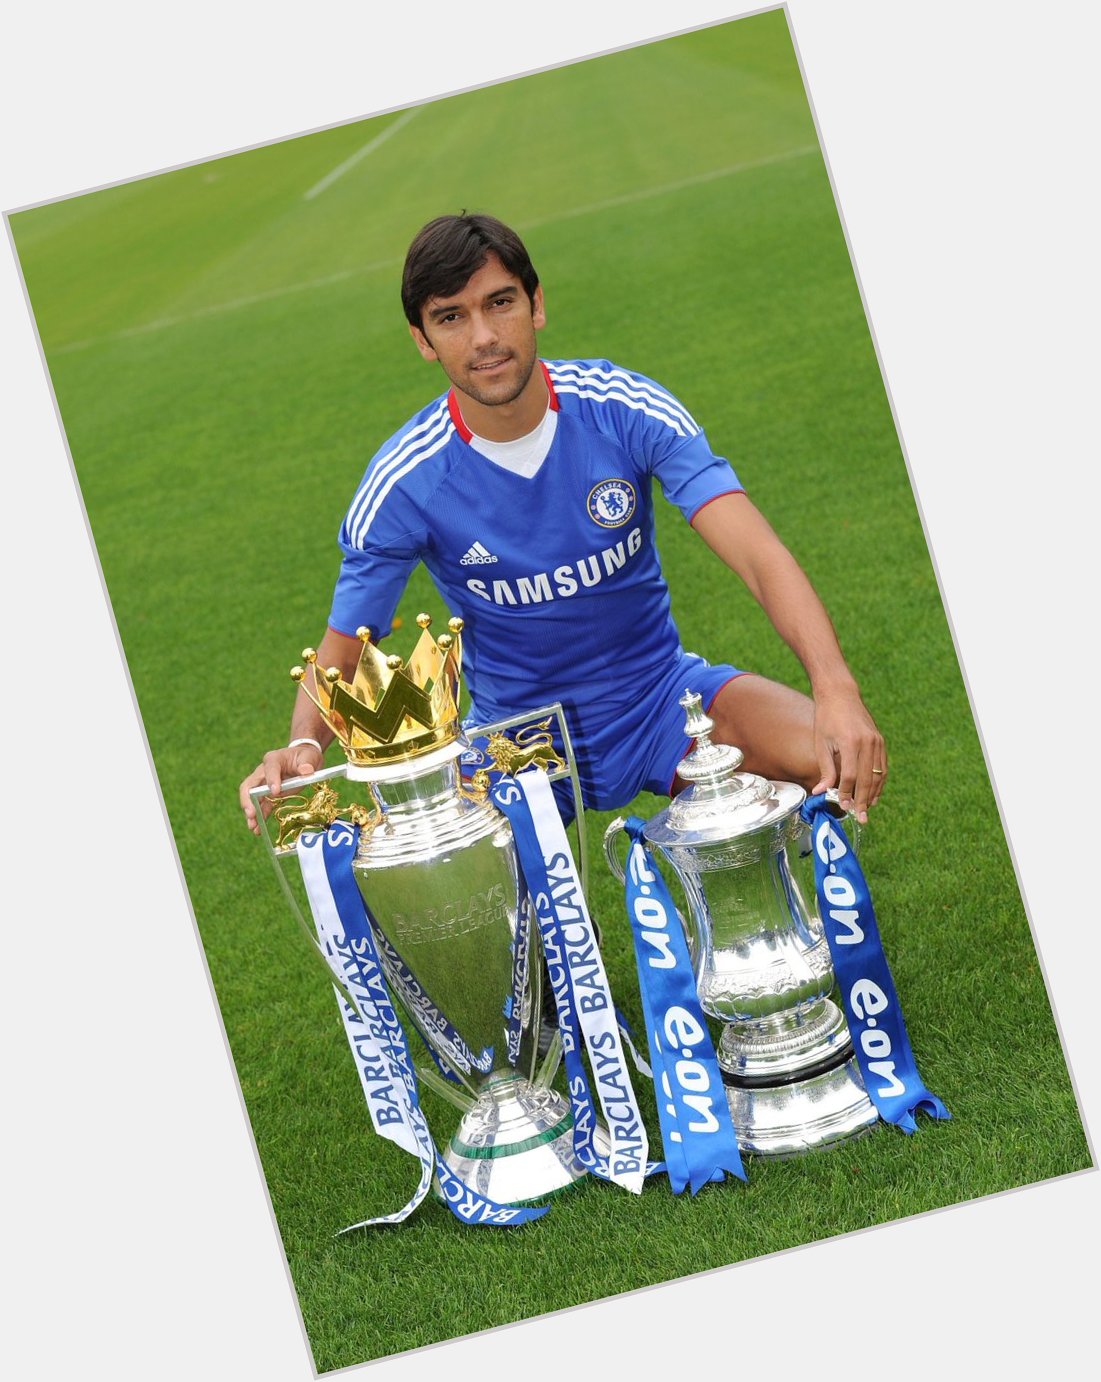 Happy 40th Birthday Paulo Ferreira!

A solid defender with a wicked cross, he won it all   